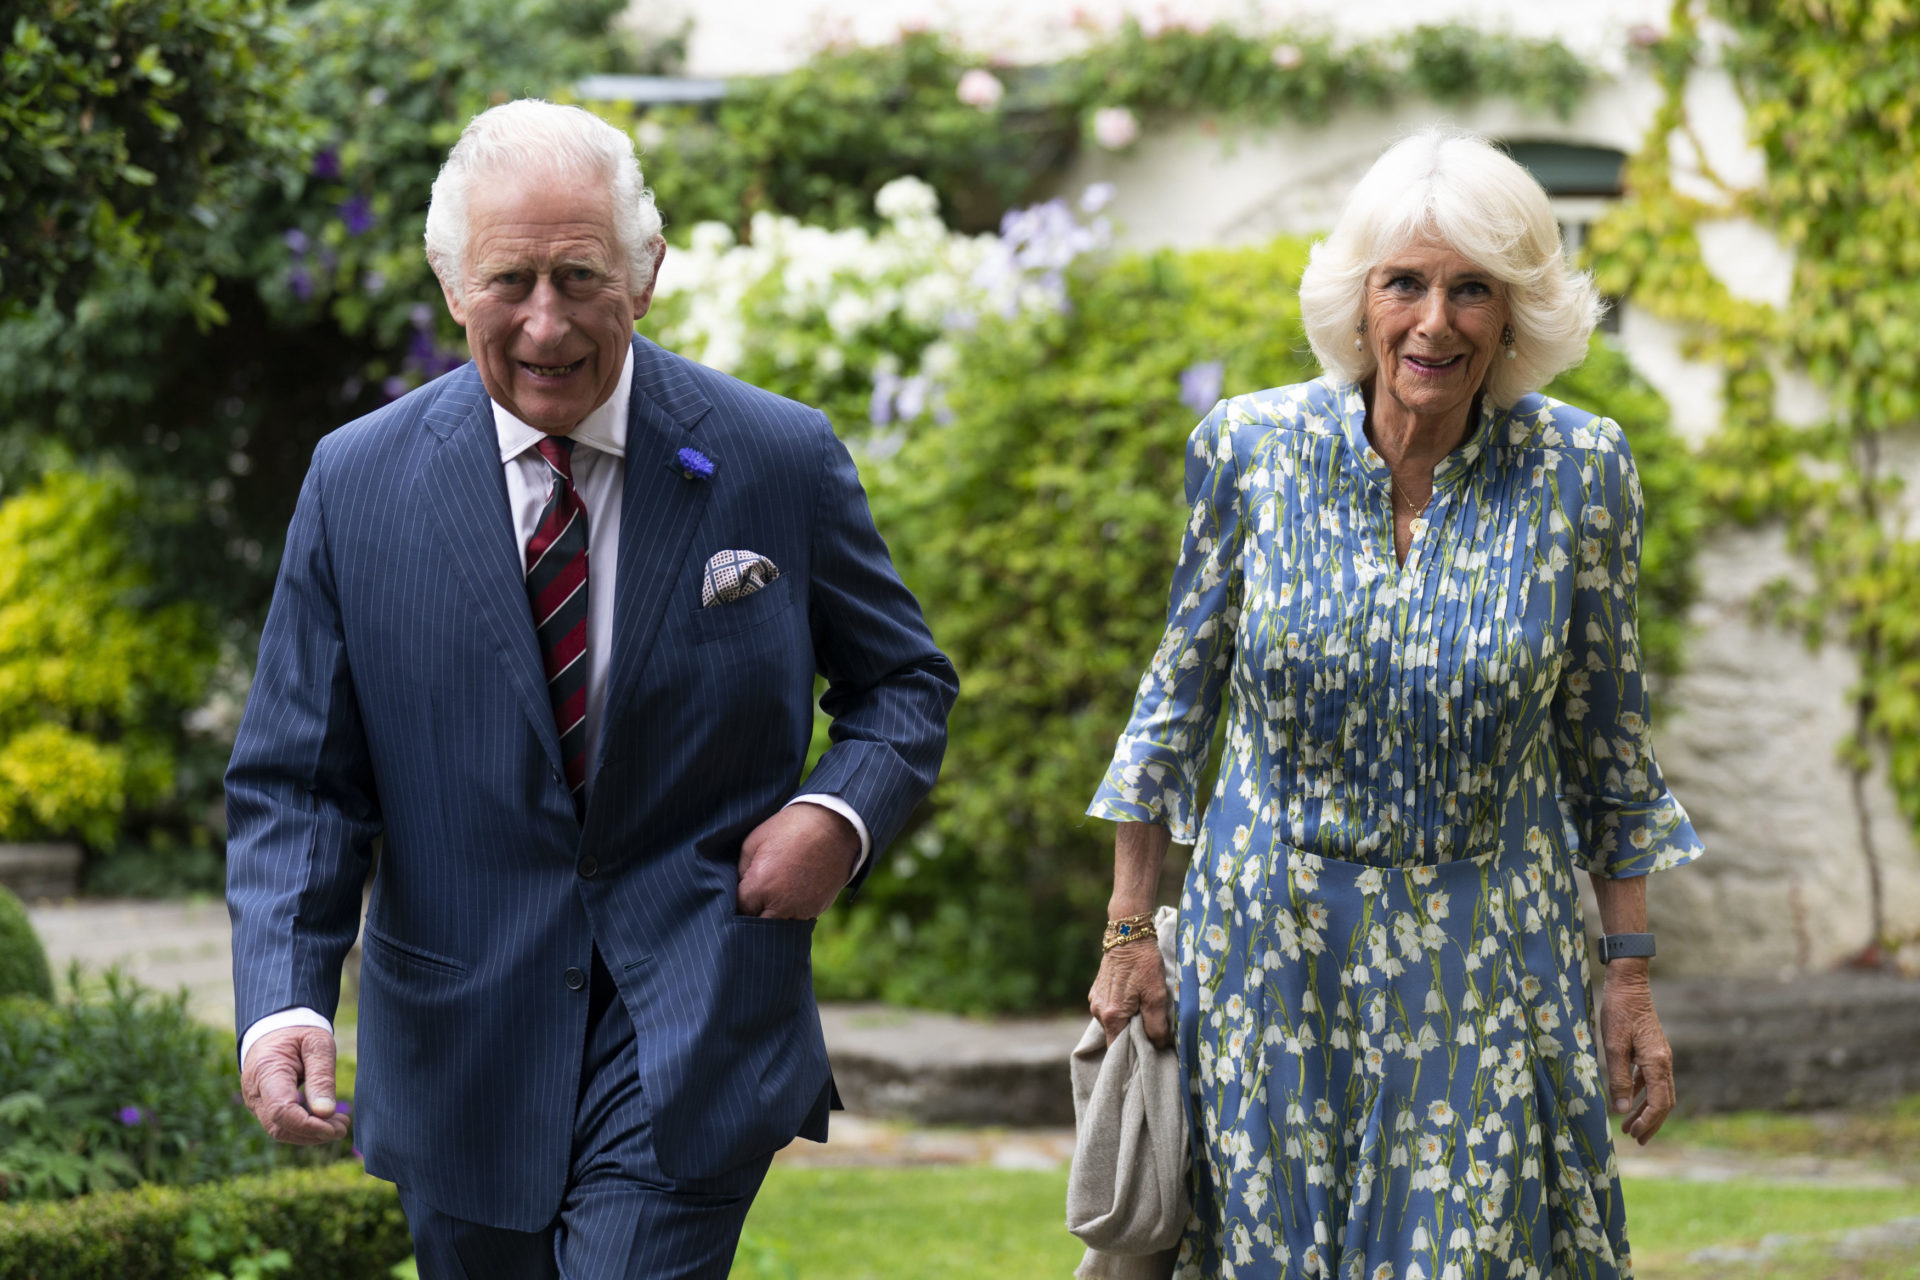 The Prince Of Wales And Duchess Of Cornwall Visit Wales - Day 1